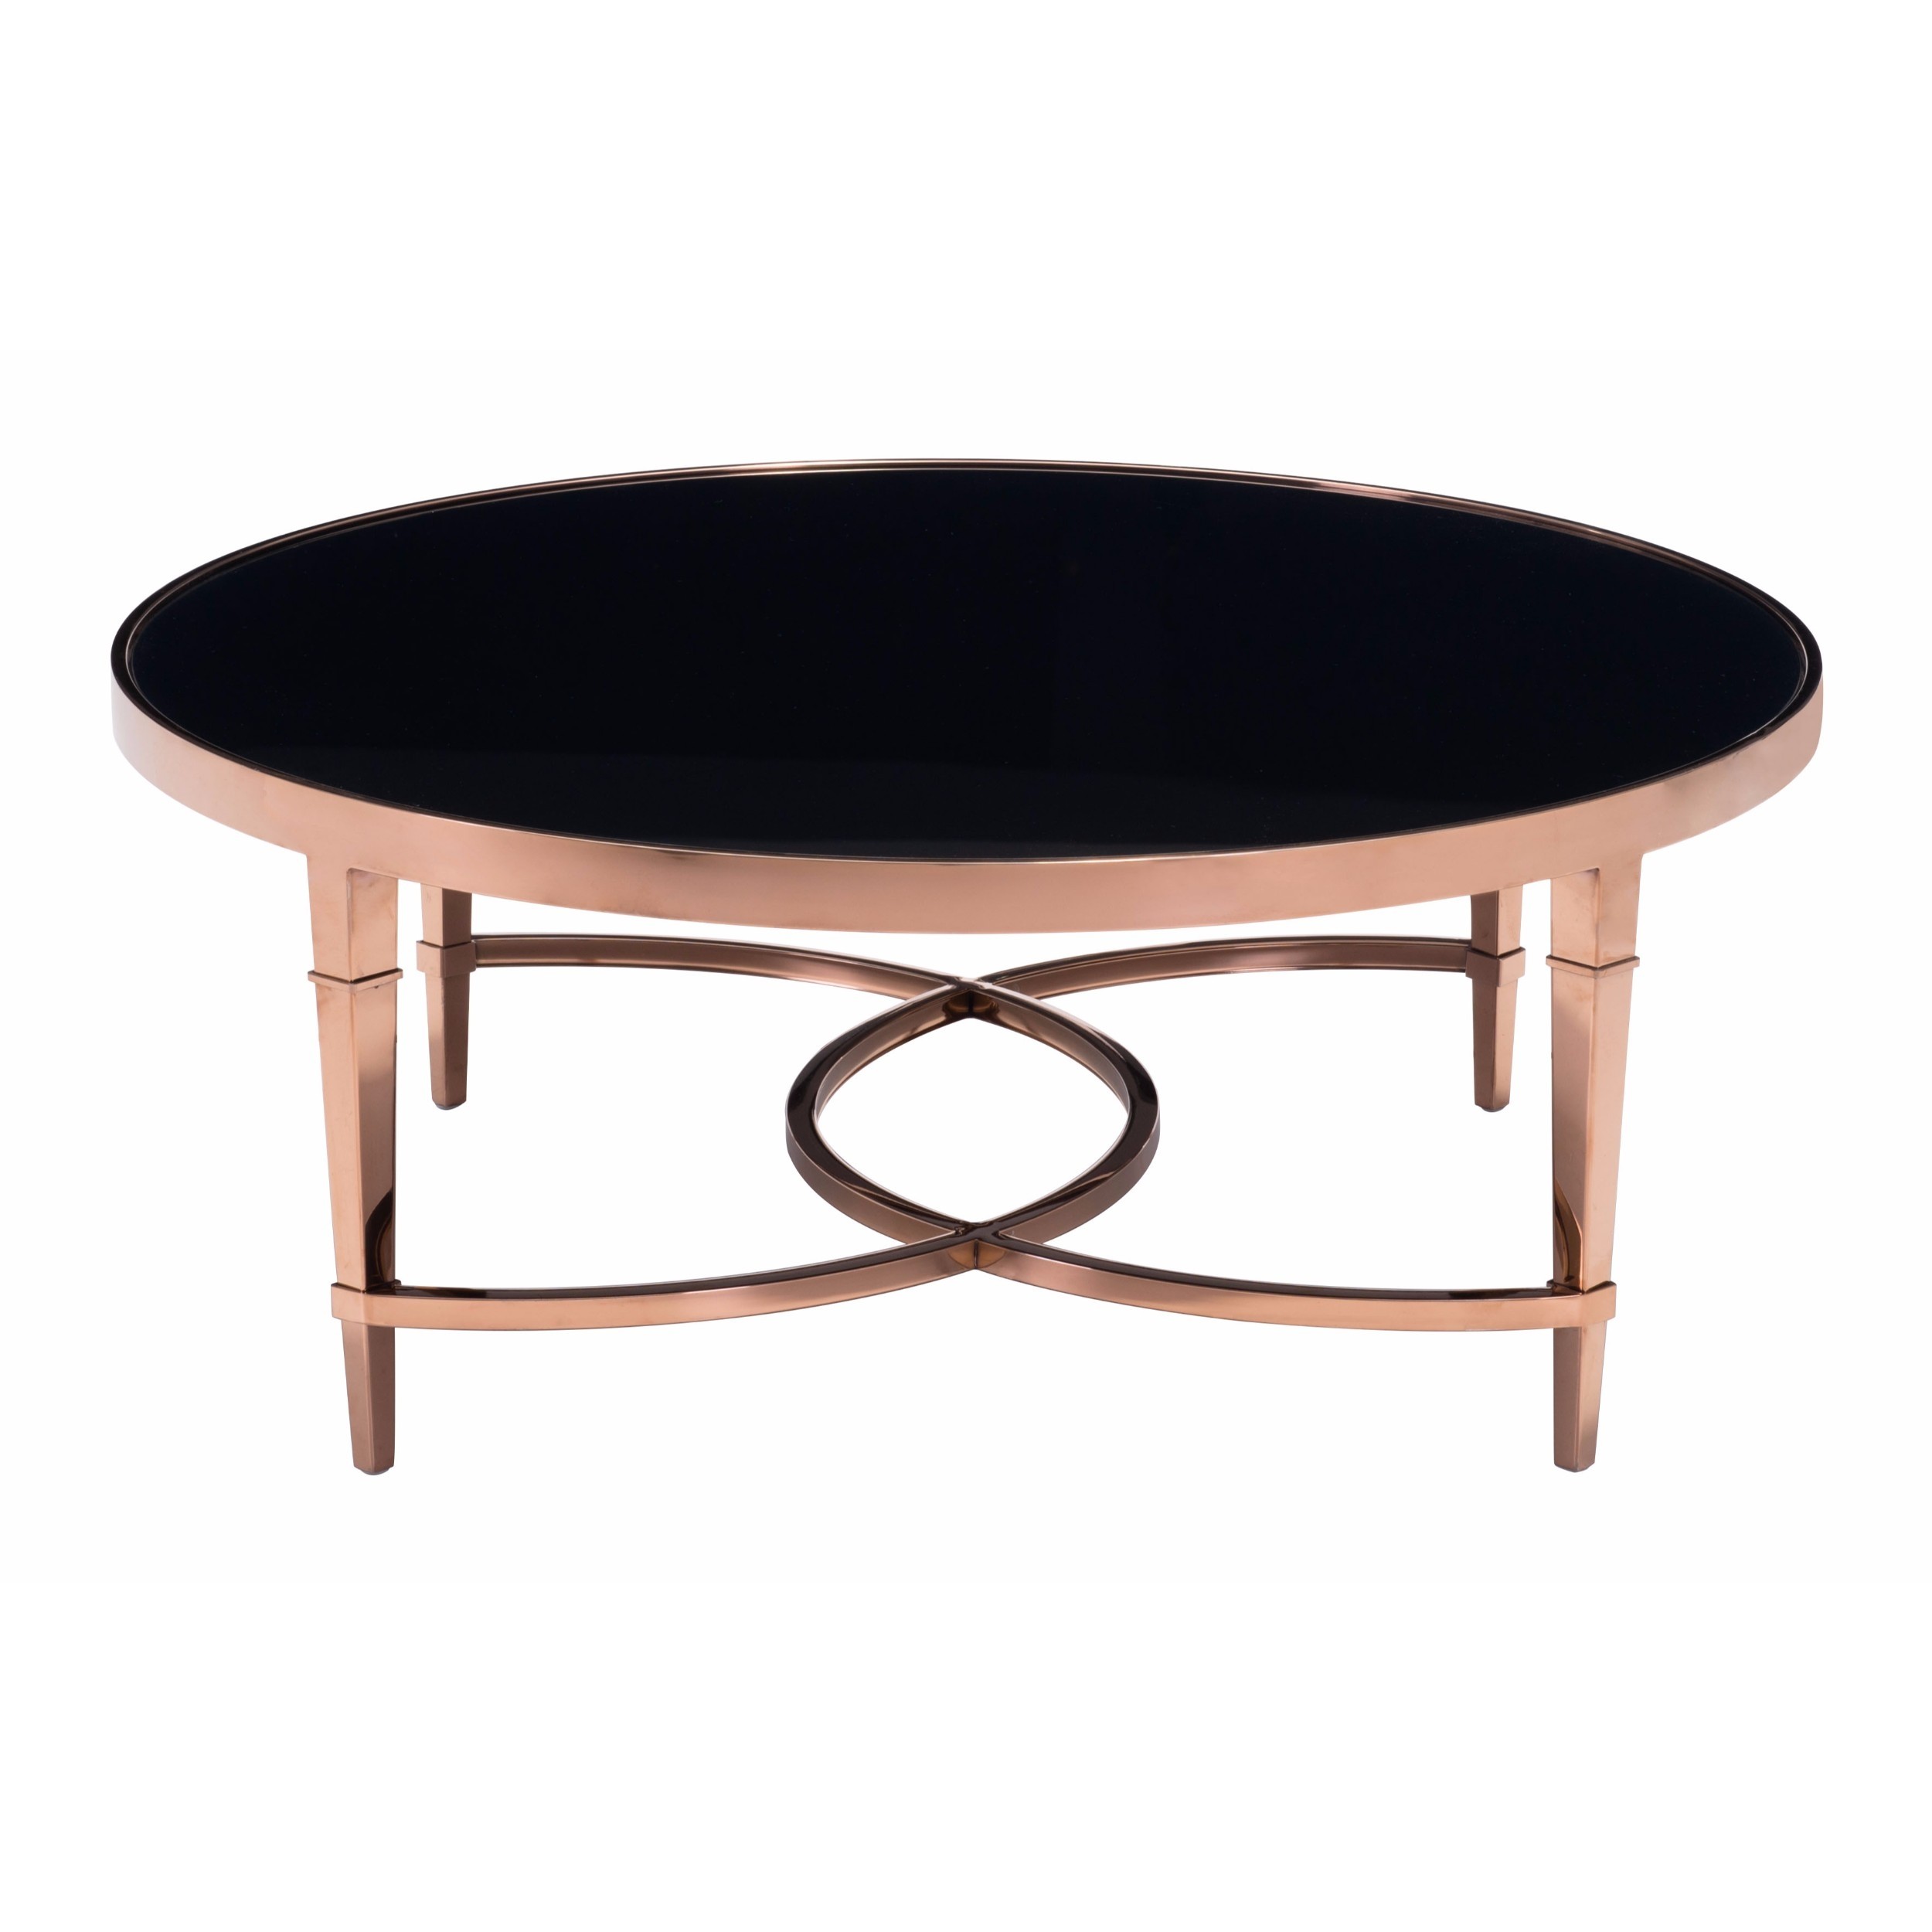 elite coffee table tables accent furniture outdoor long narrow bar beverage tub with stand black wicker patio terrace dining sets kmart chairs pink lamp covers very hall small